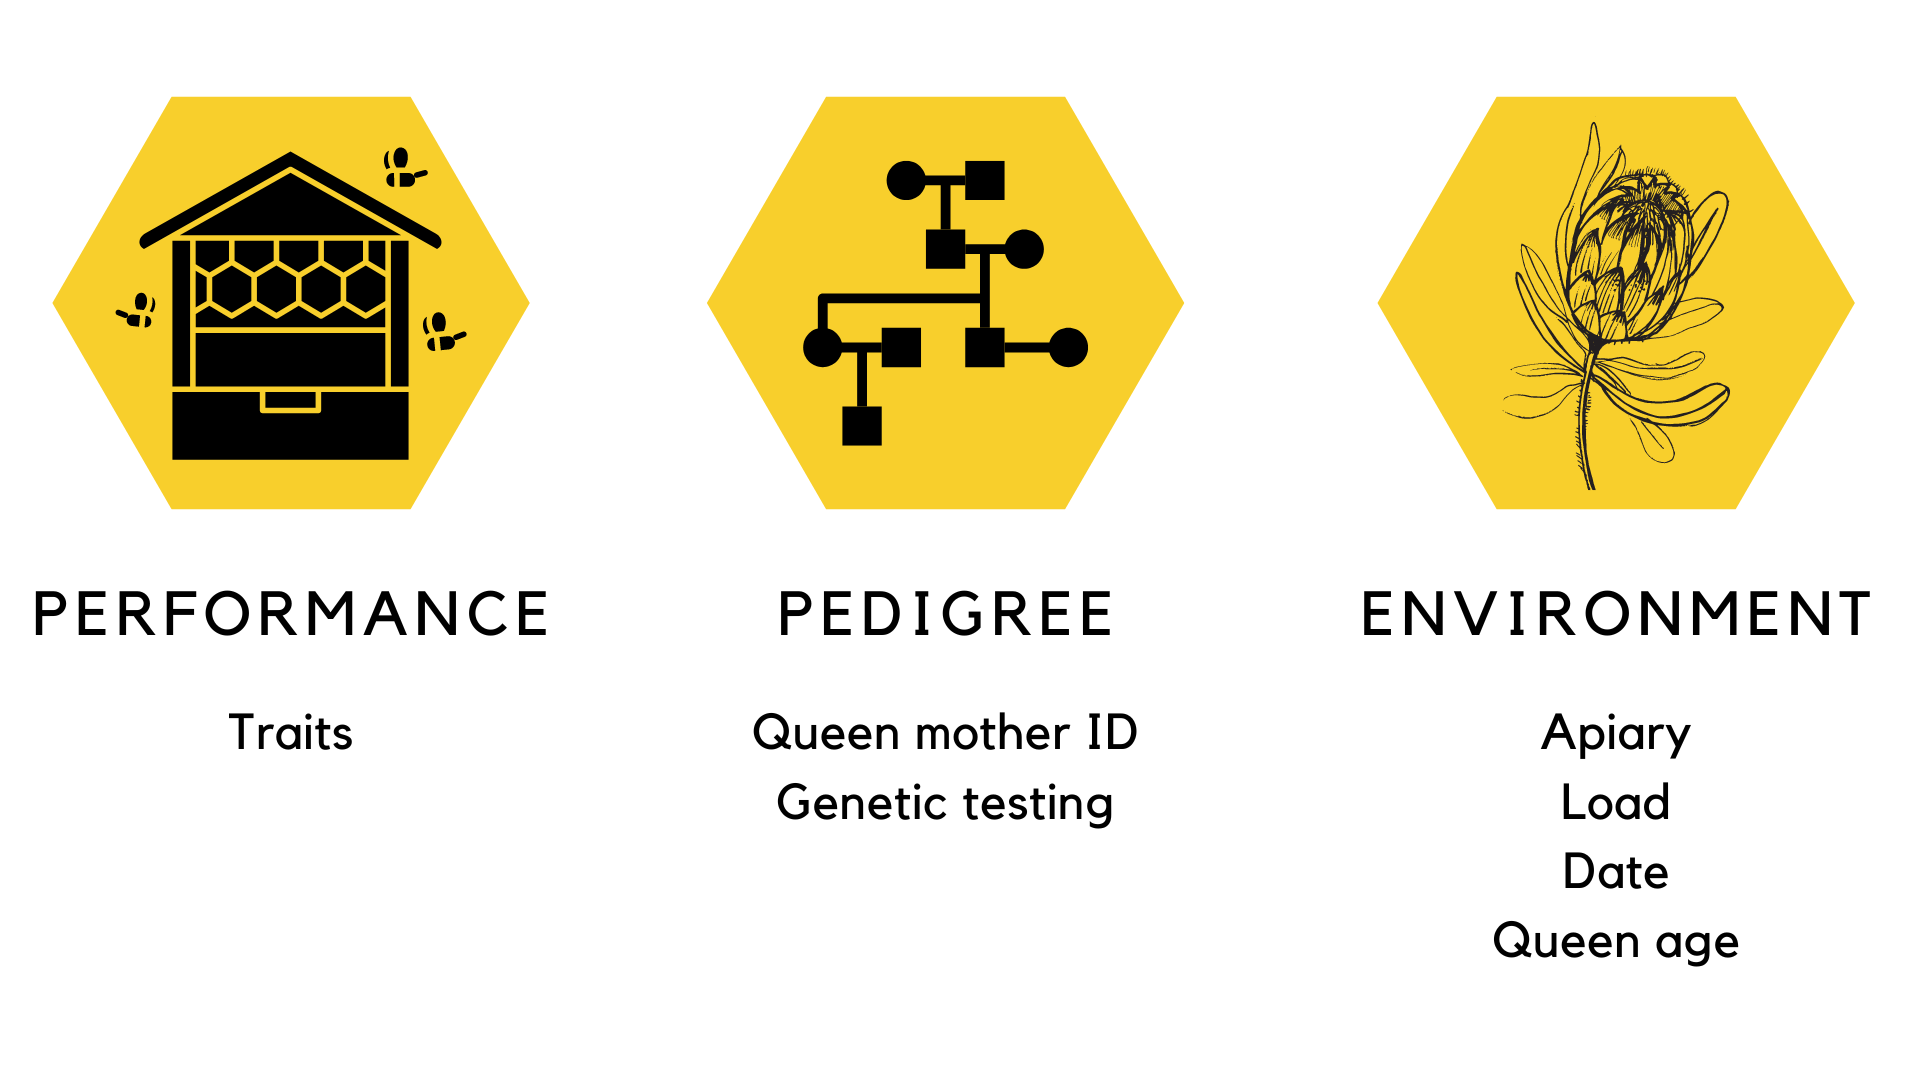 Figure 2. Performance, pedigree and environmental data is required to produce Estimated Breeding Values